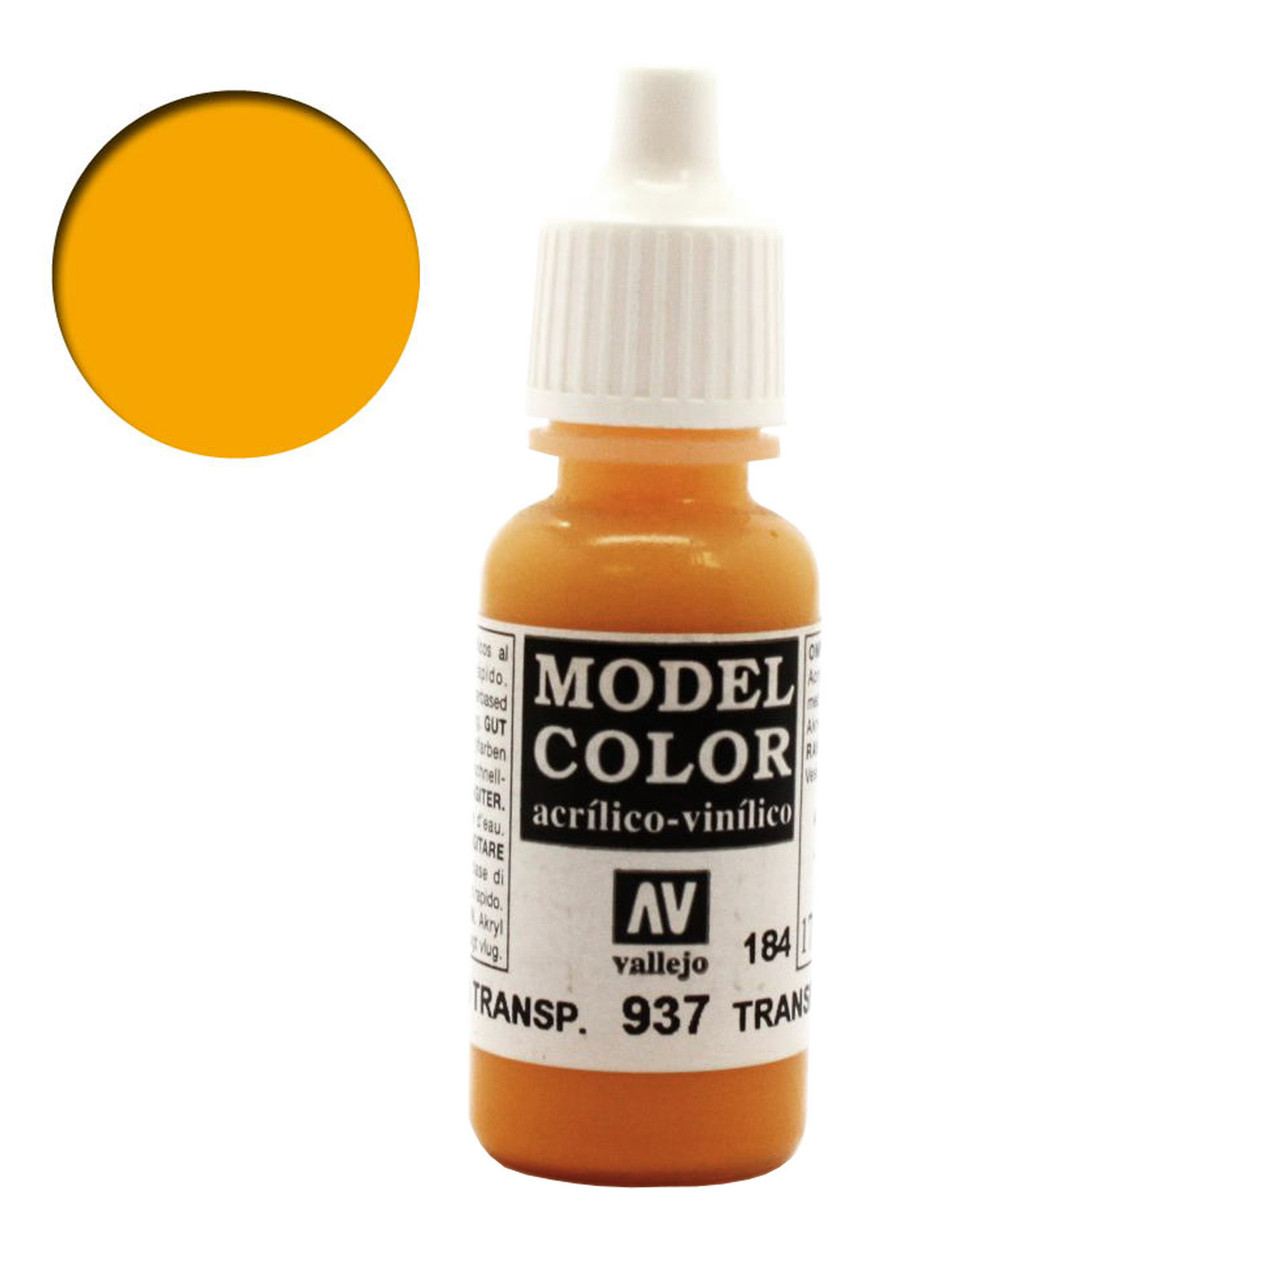 Prince August quality synthetic brushes for painting models and miniatures